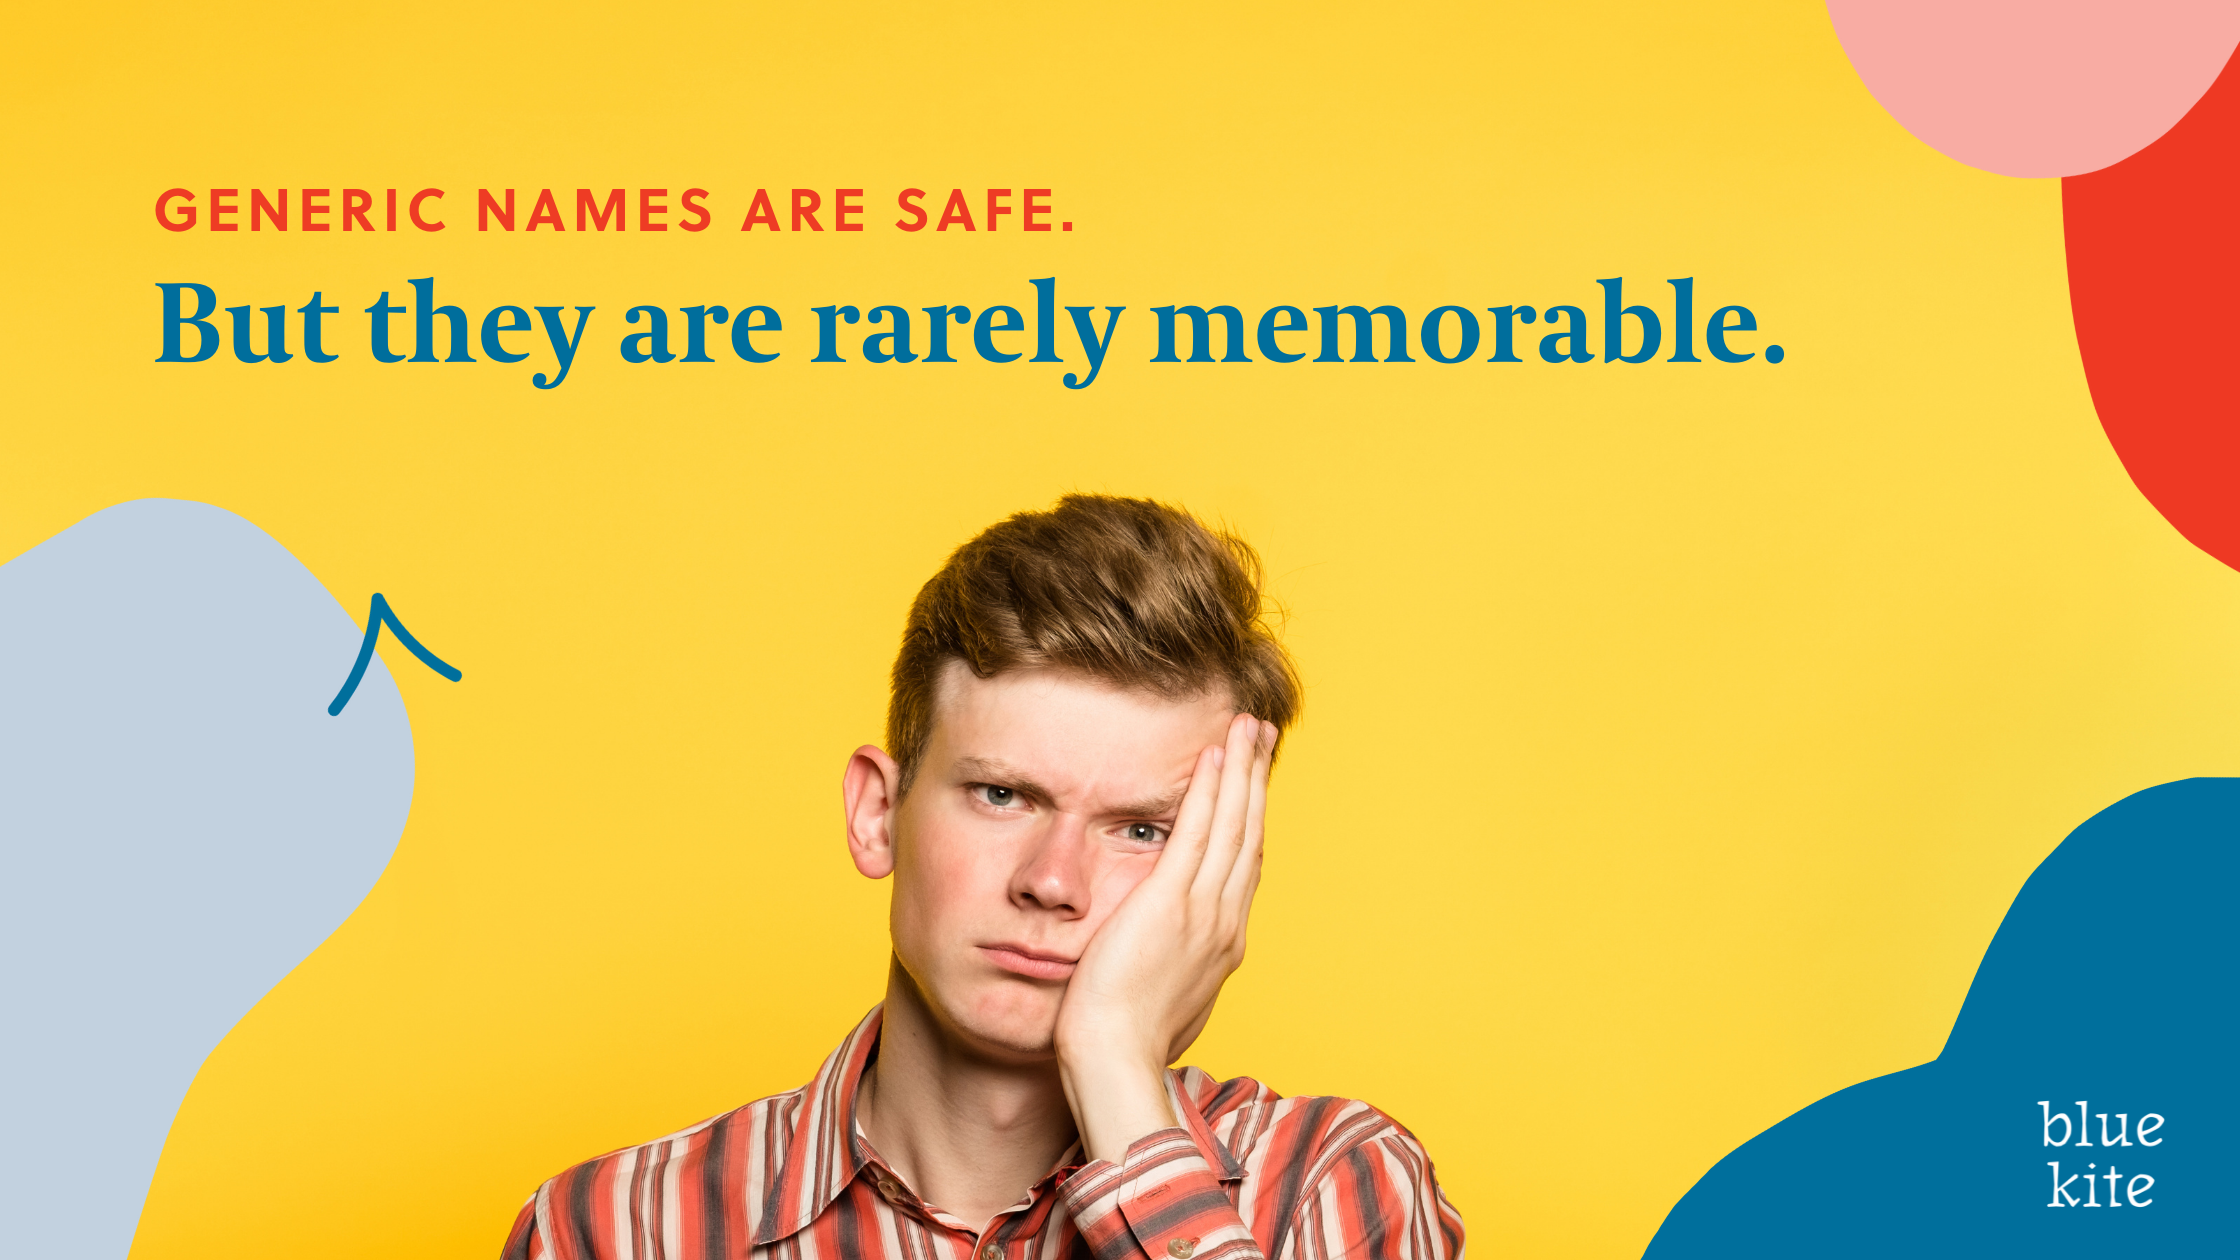 Bored man - generic names are safe but not memorable